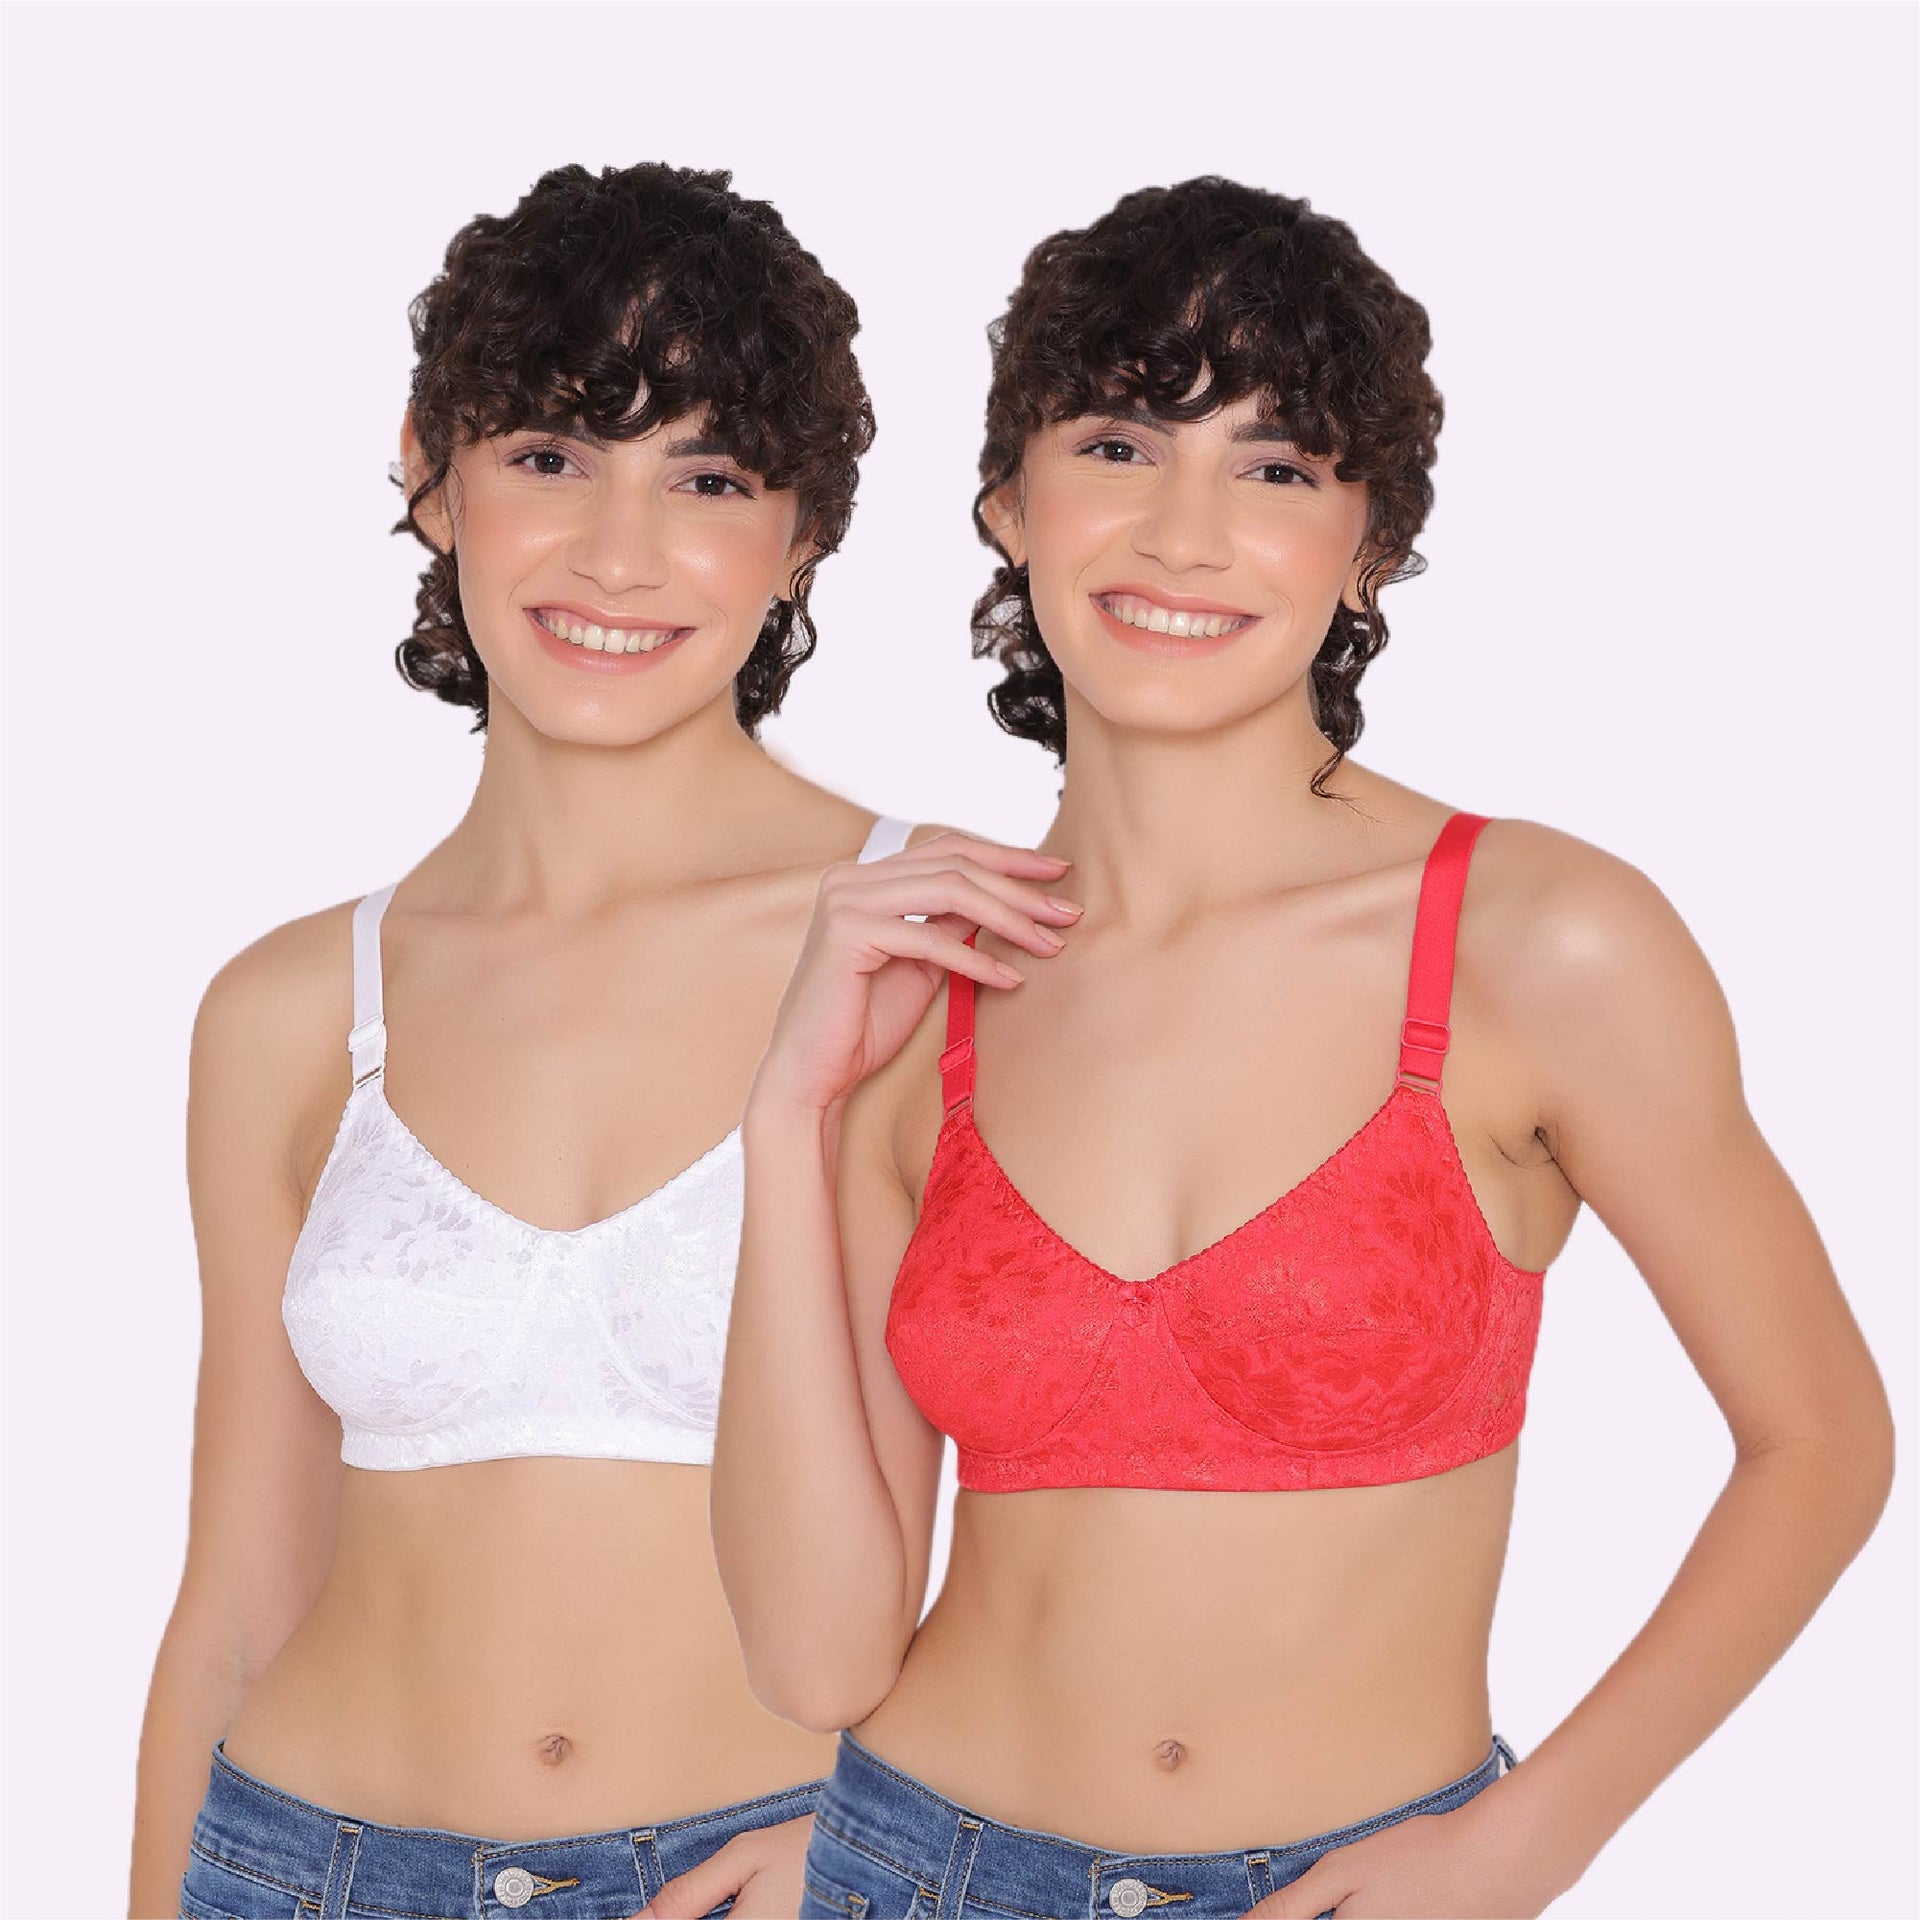 Alluring Khaki Cotton Non-Padded Bras For Women, Pure Cotton Bra, कपास ब्रा  - Suncloud Systems, Rajapalayam